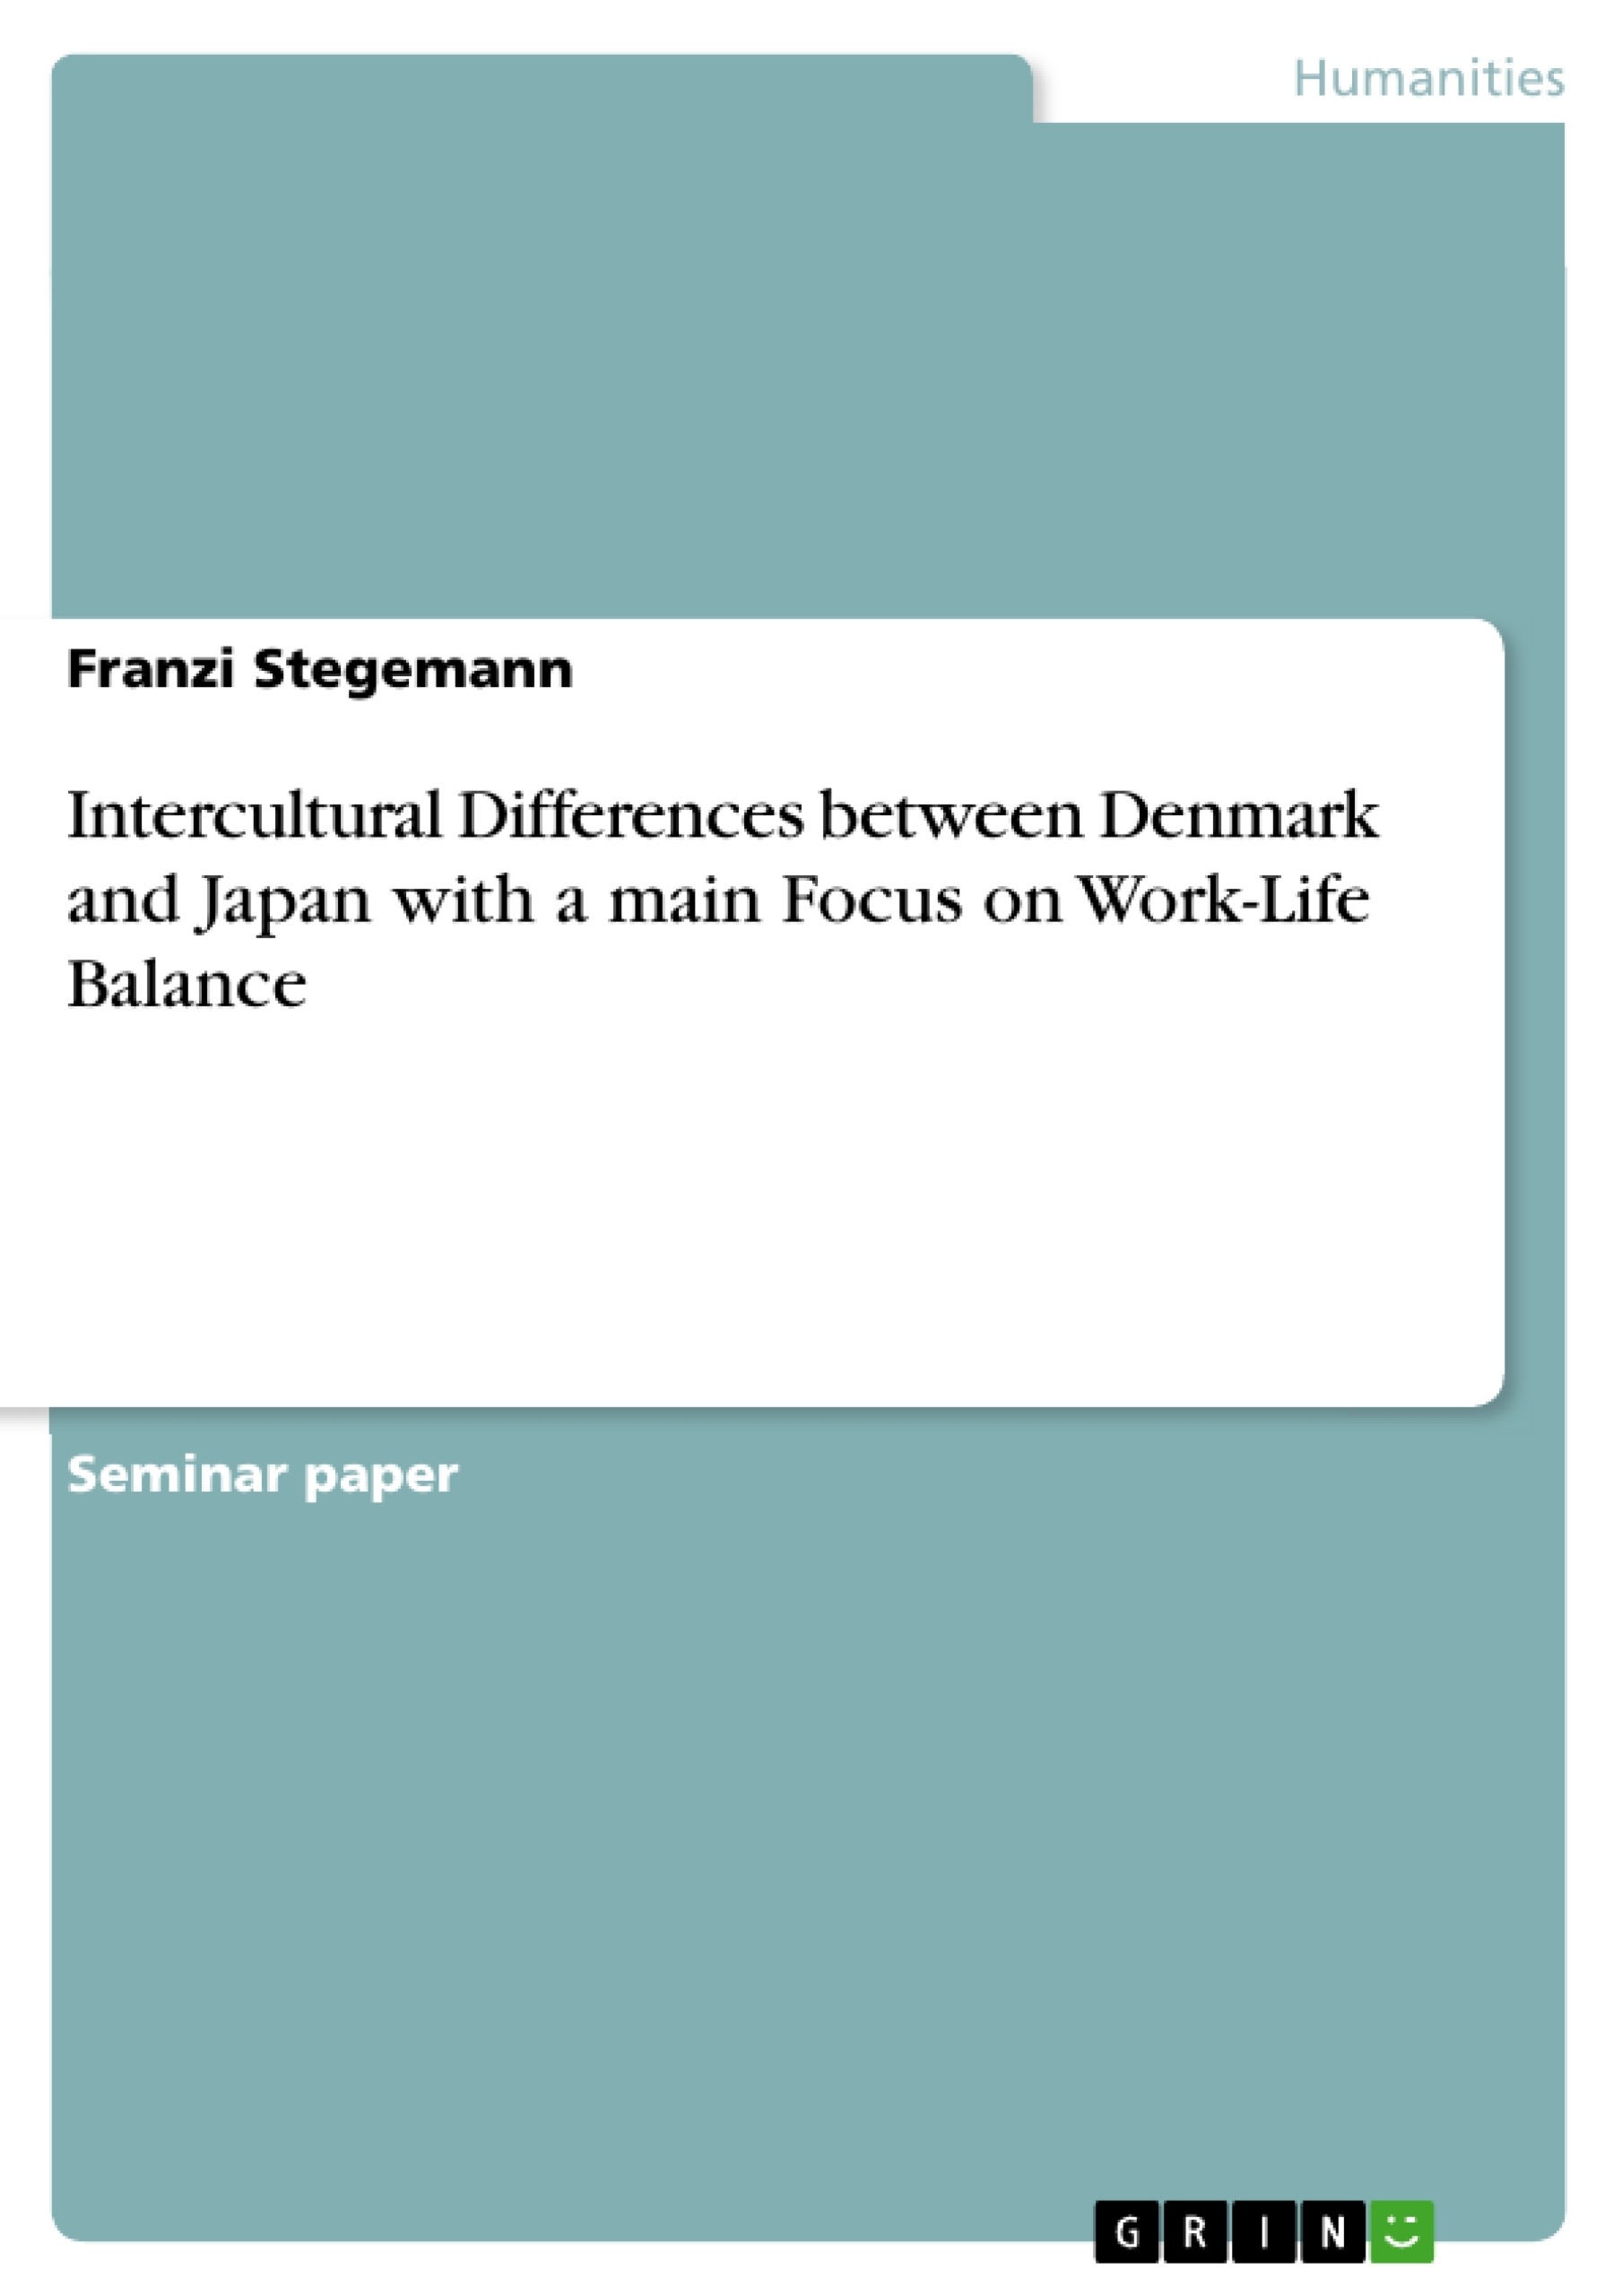 Título: Intercultural Differences between Denmark and Japan with a main Focus on Work-Life Balance